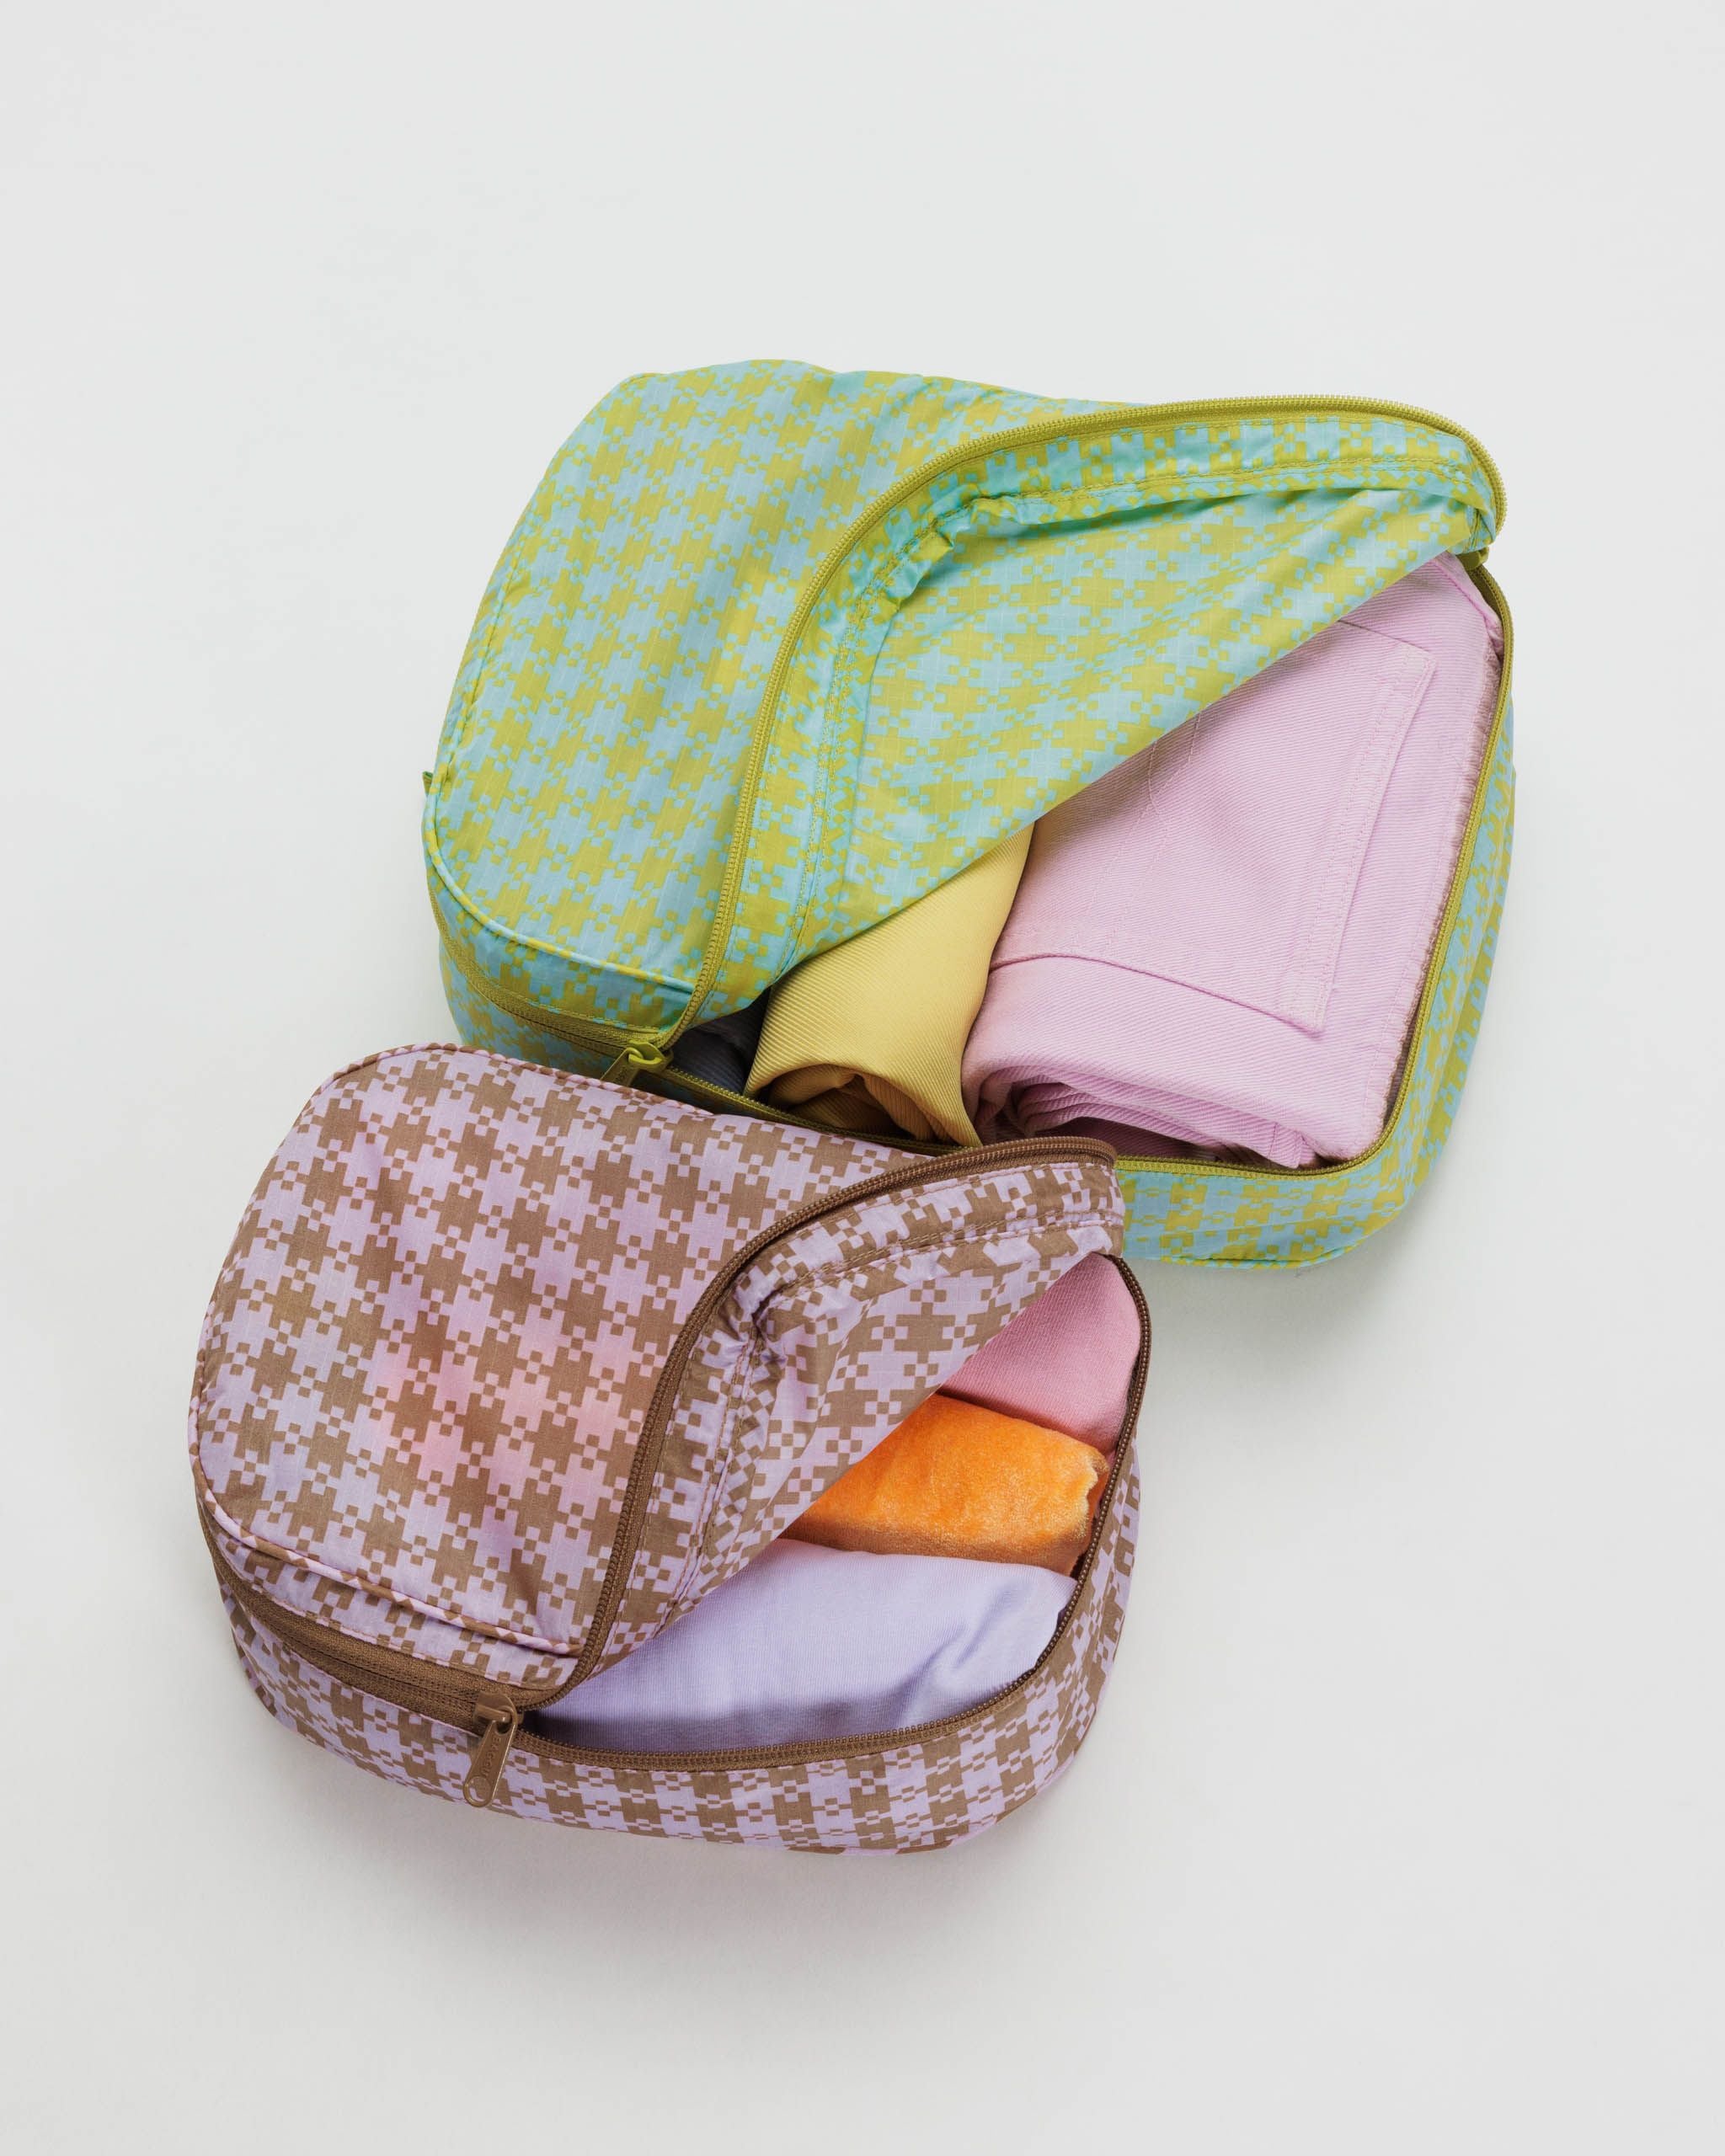 Packing Cubes Gingham Checkered Linen 3-pack